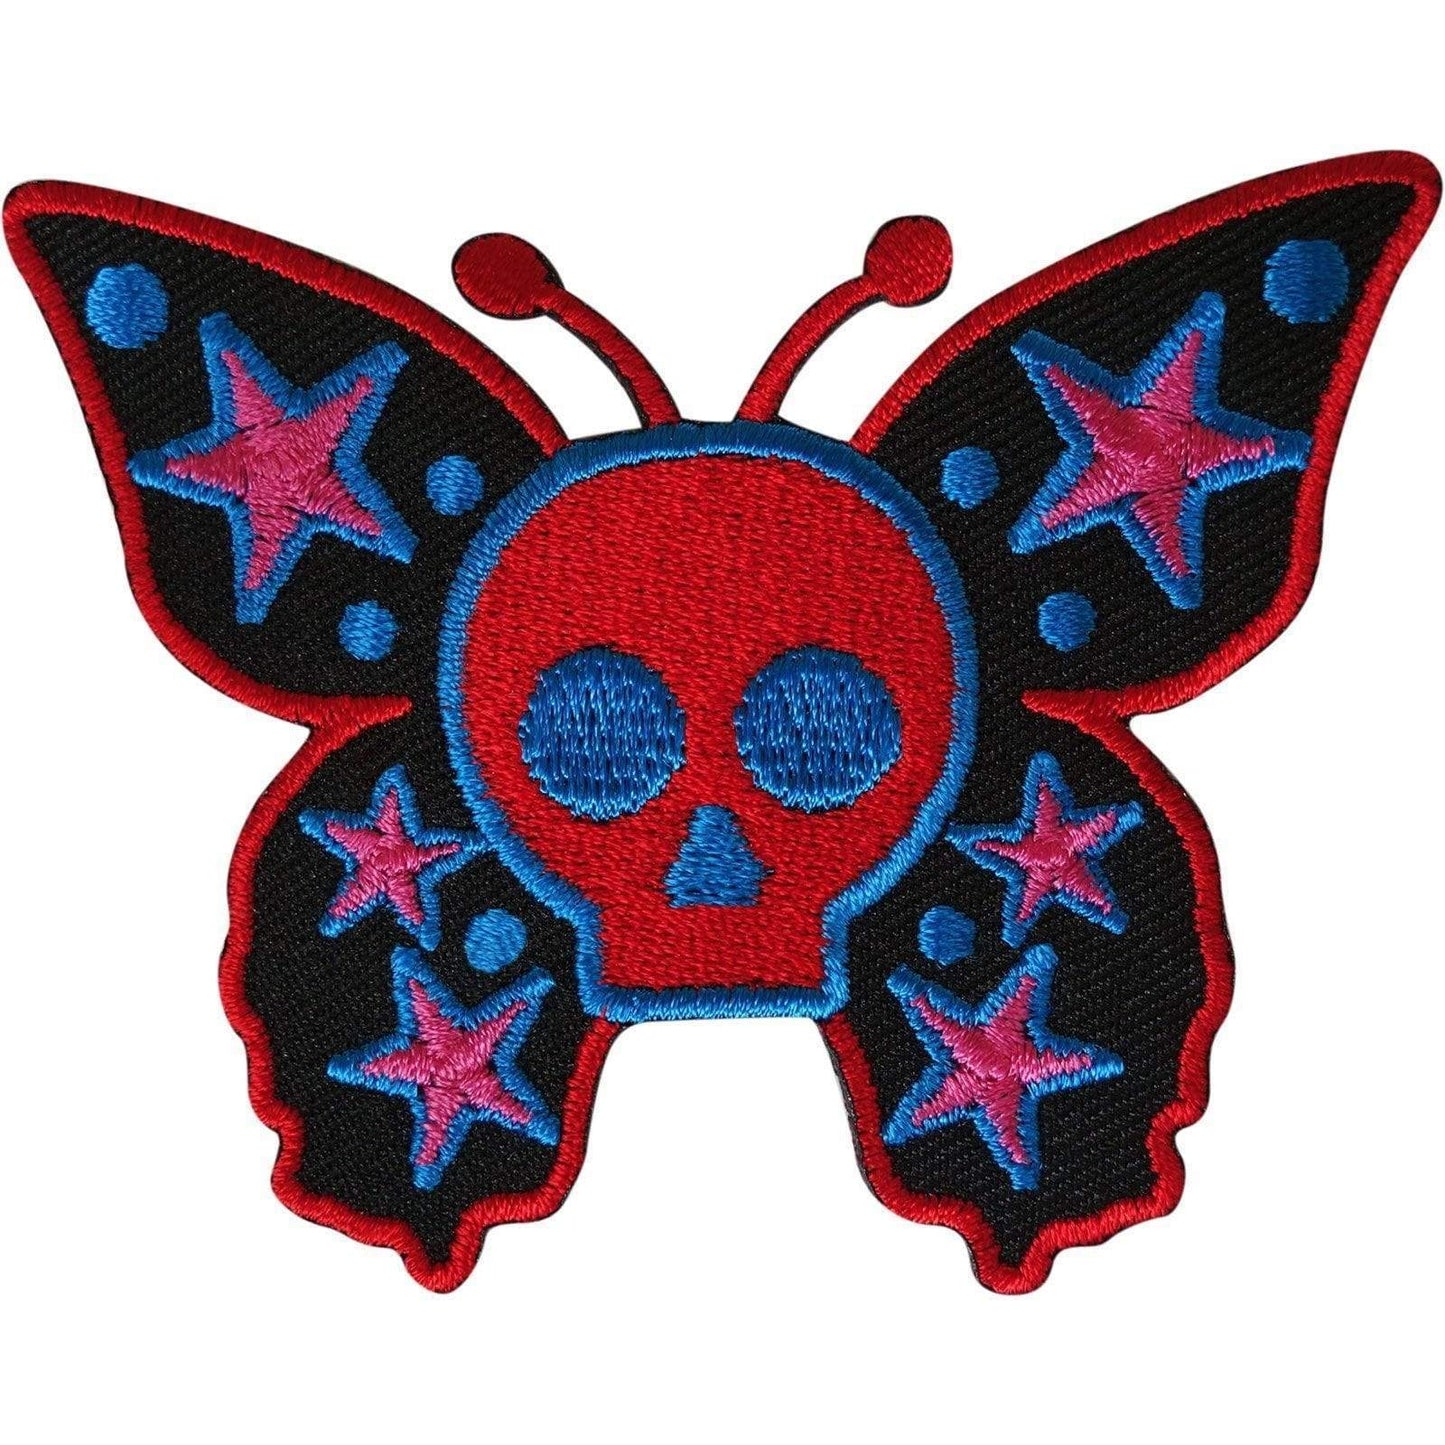 Skull Butterfly Patch Iron Sew On Jacket Dress Embroidered Badge Star Applique